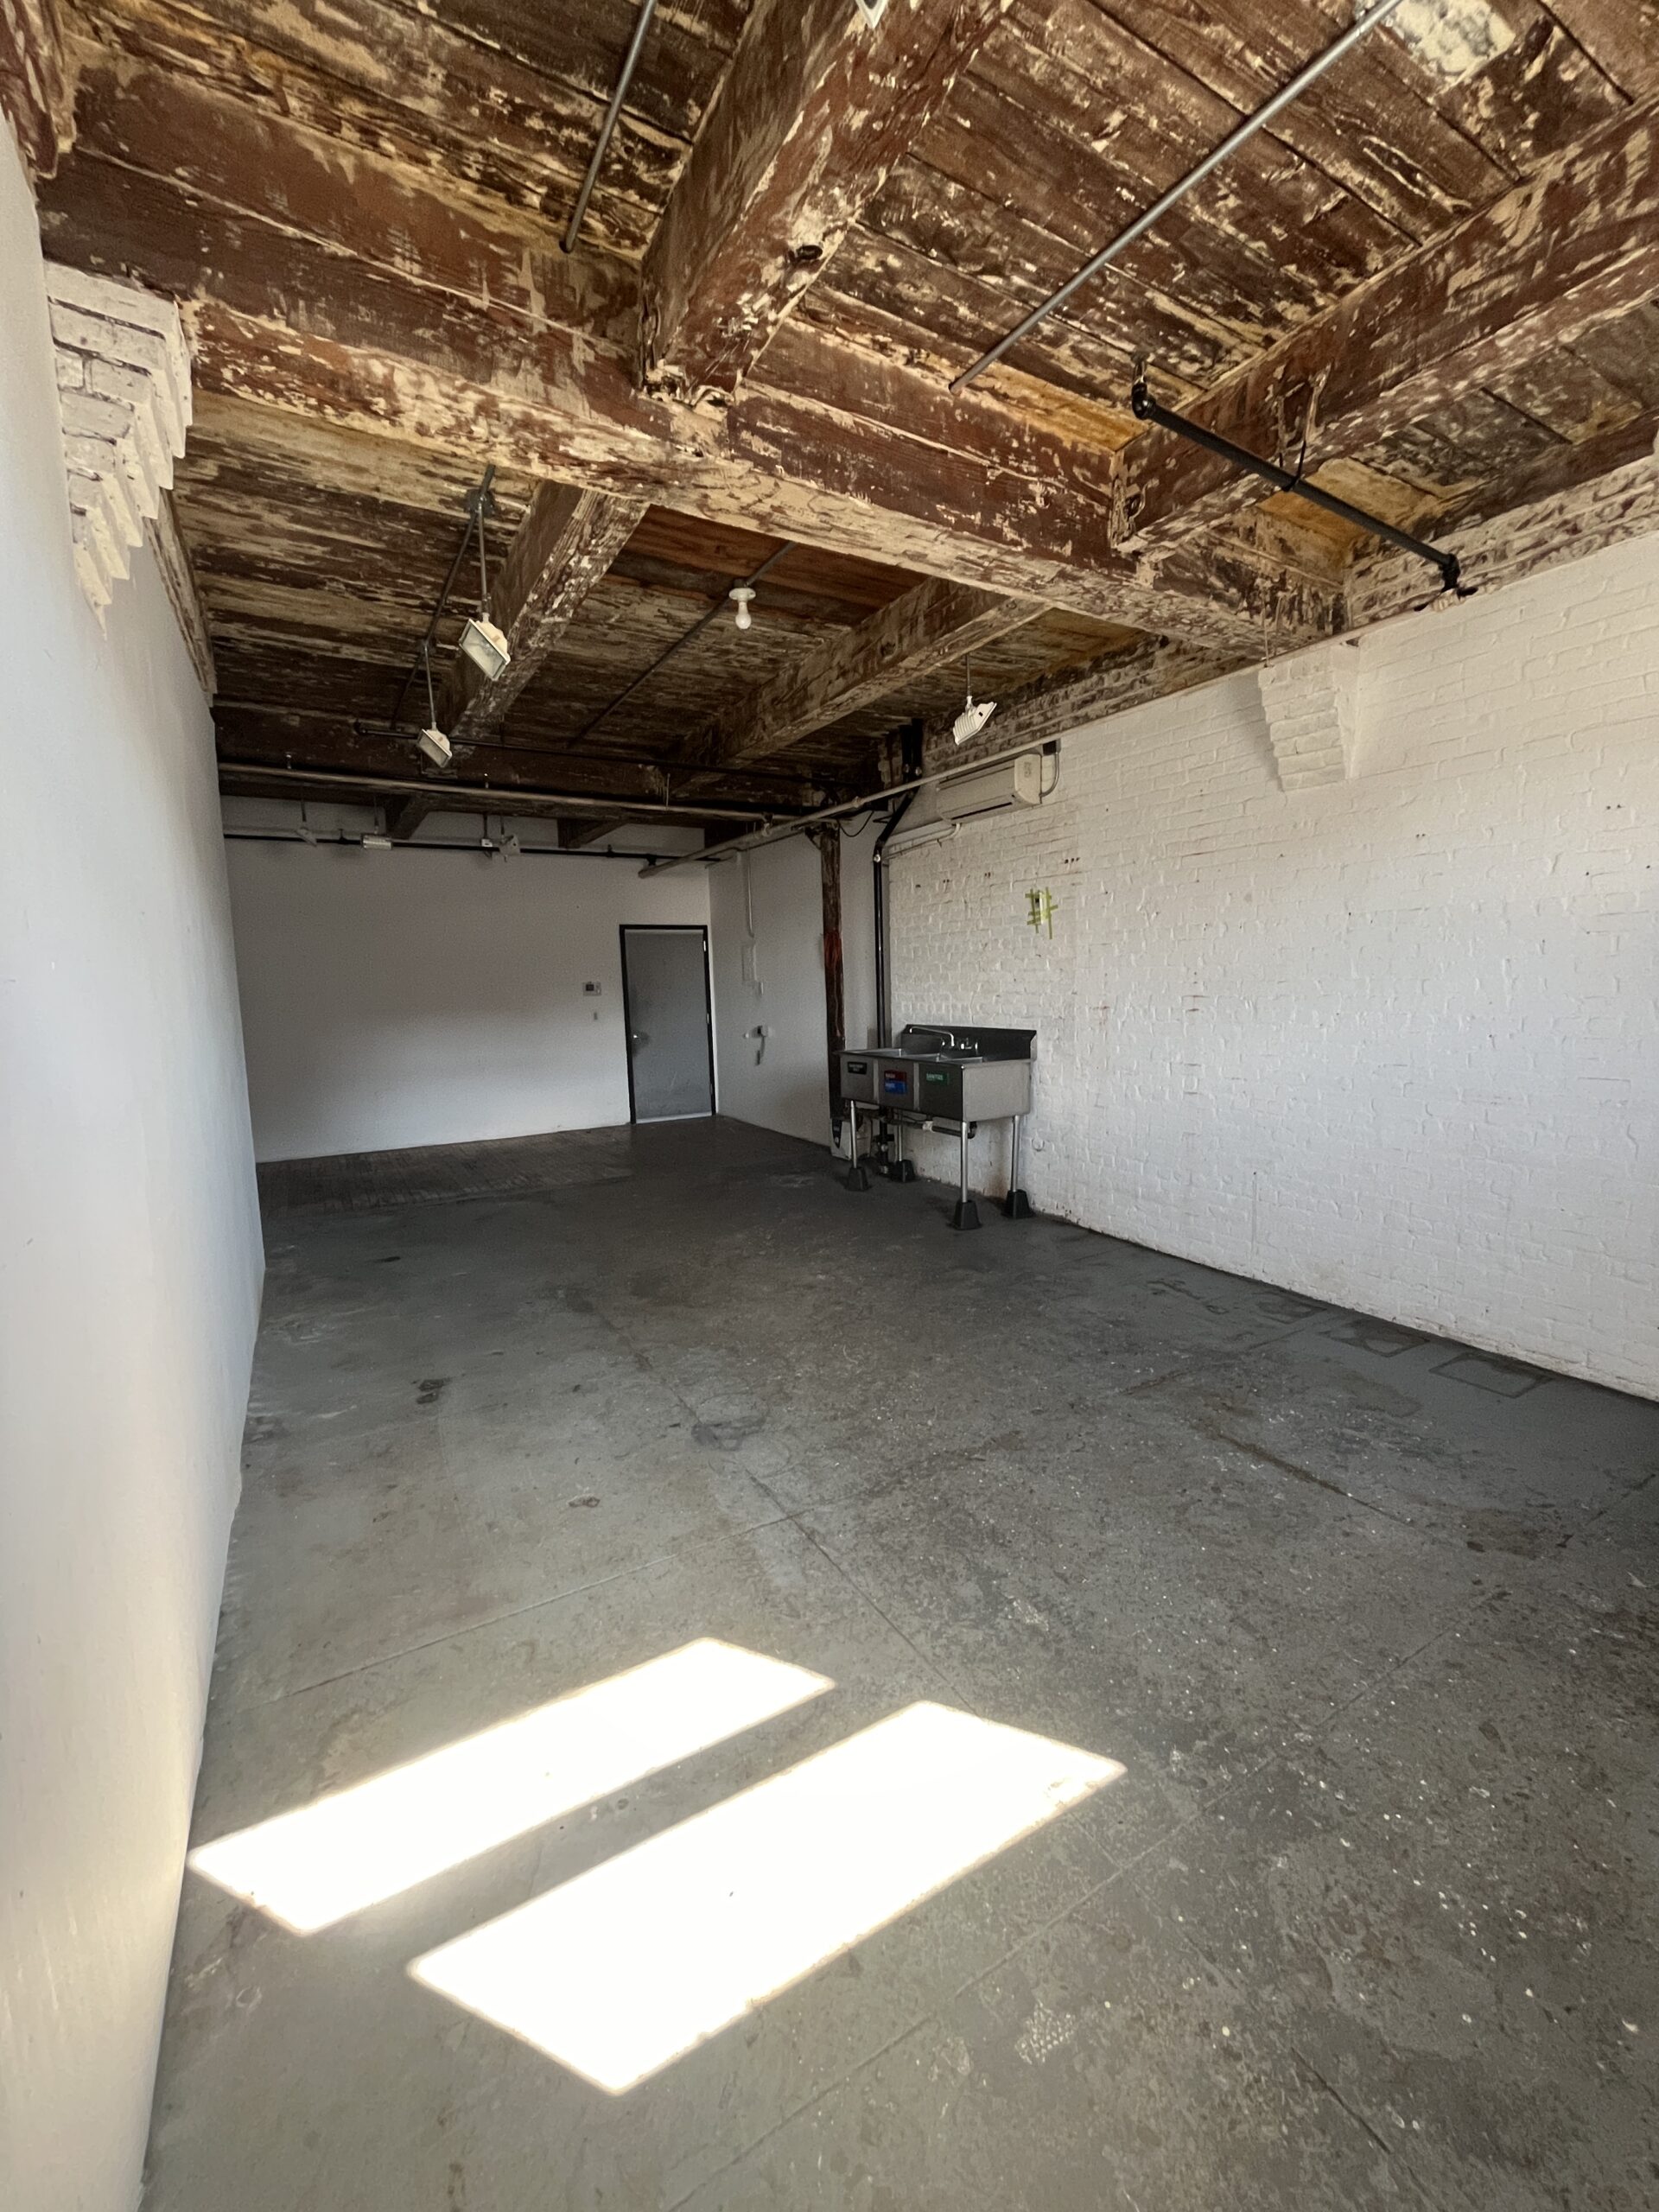 Art Studio / Creative Space / Commercial Office Available Now! - $2300